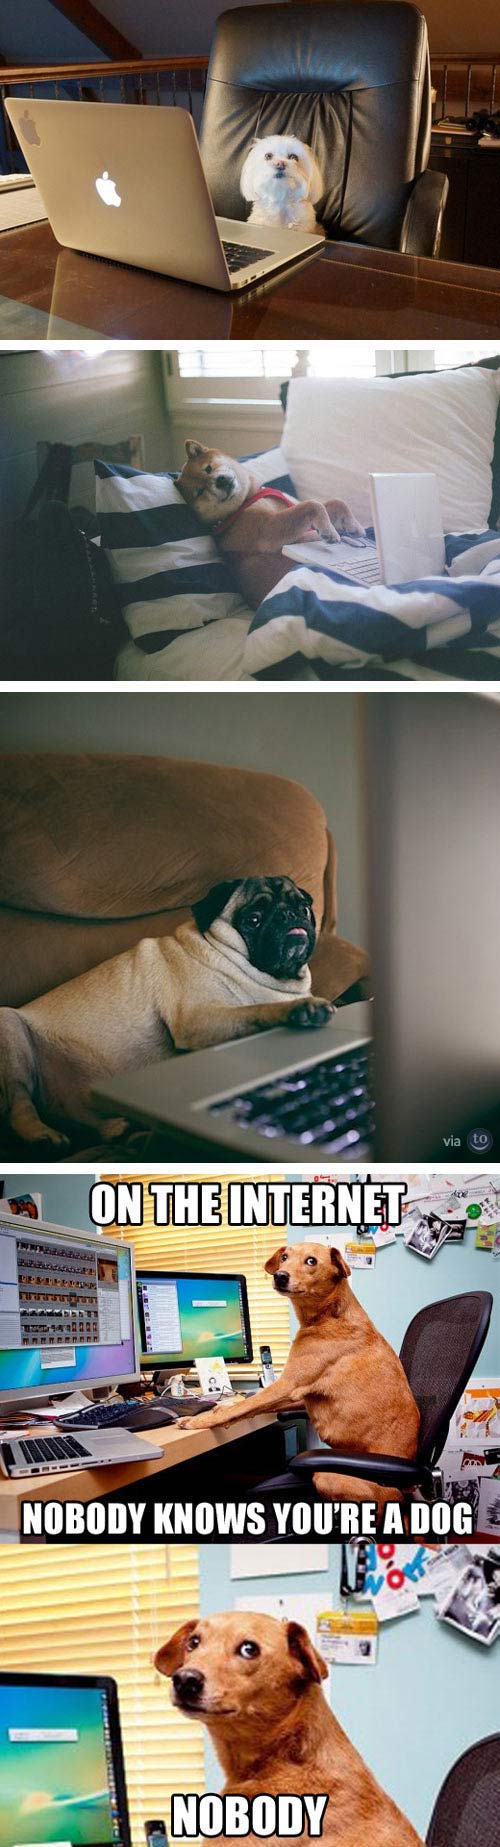 DOGS ON THE INTERNET.